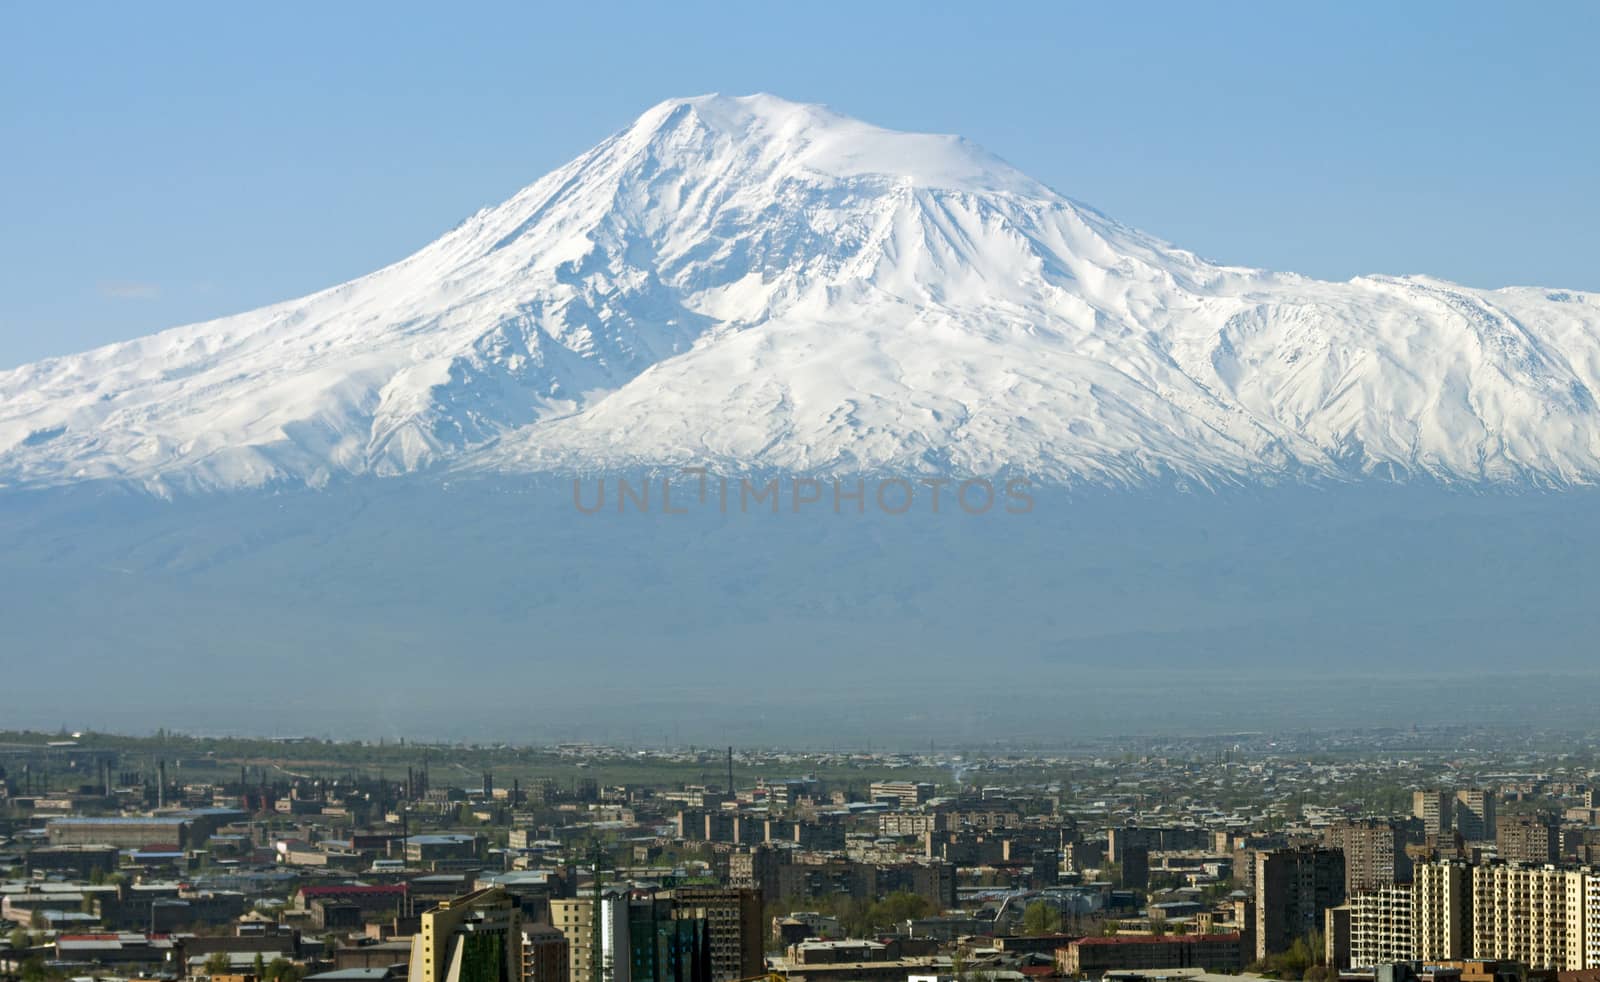 A beautiful view of the top of the Big Ararat and city Yerevan.